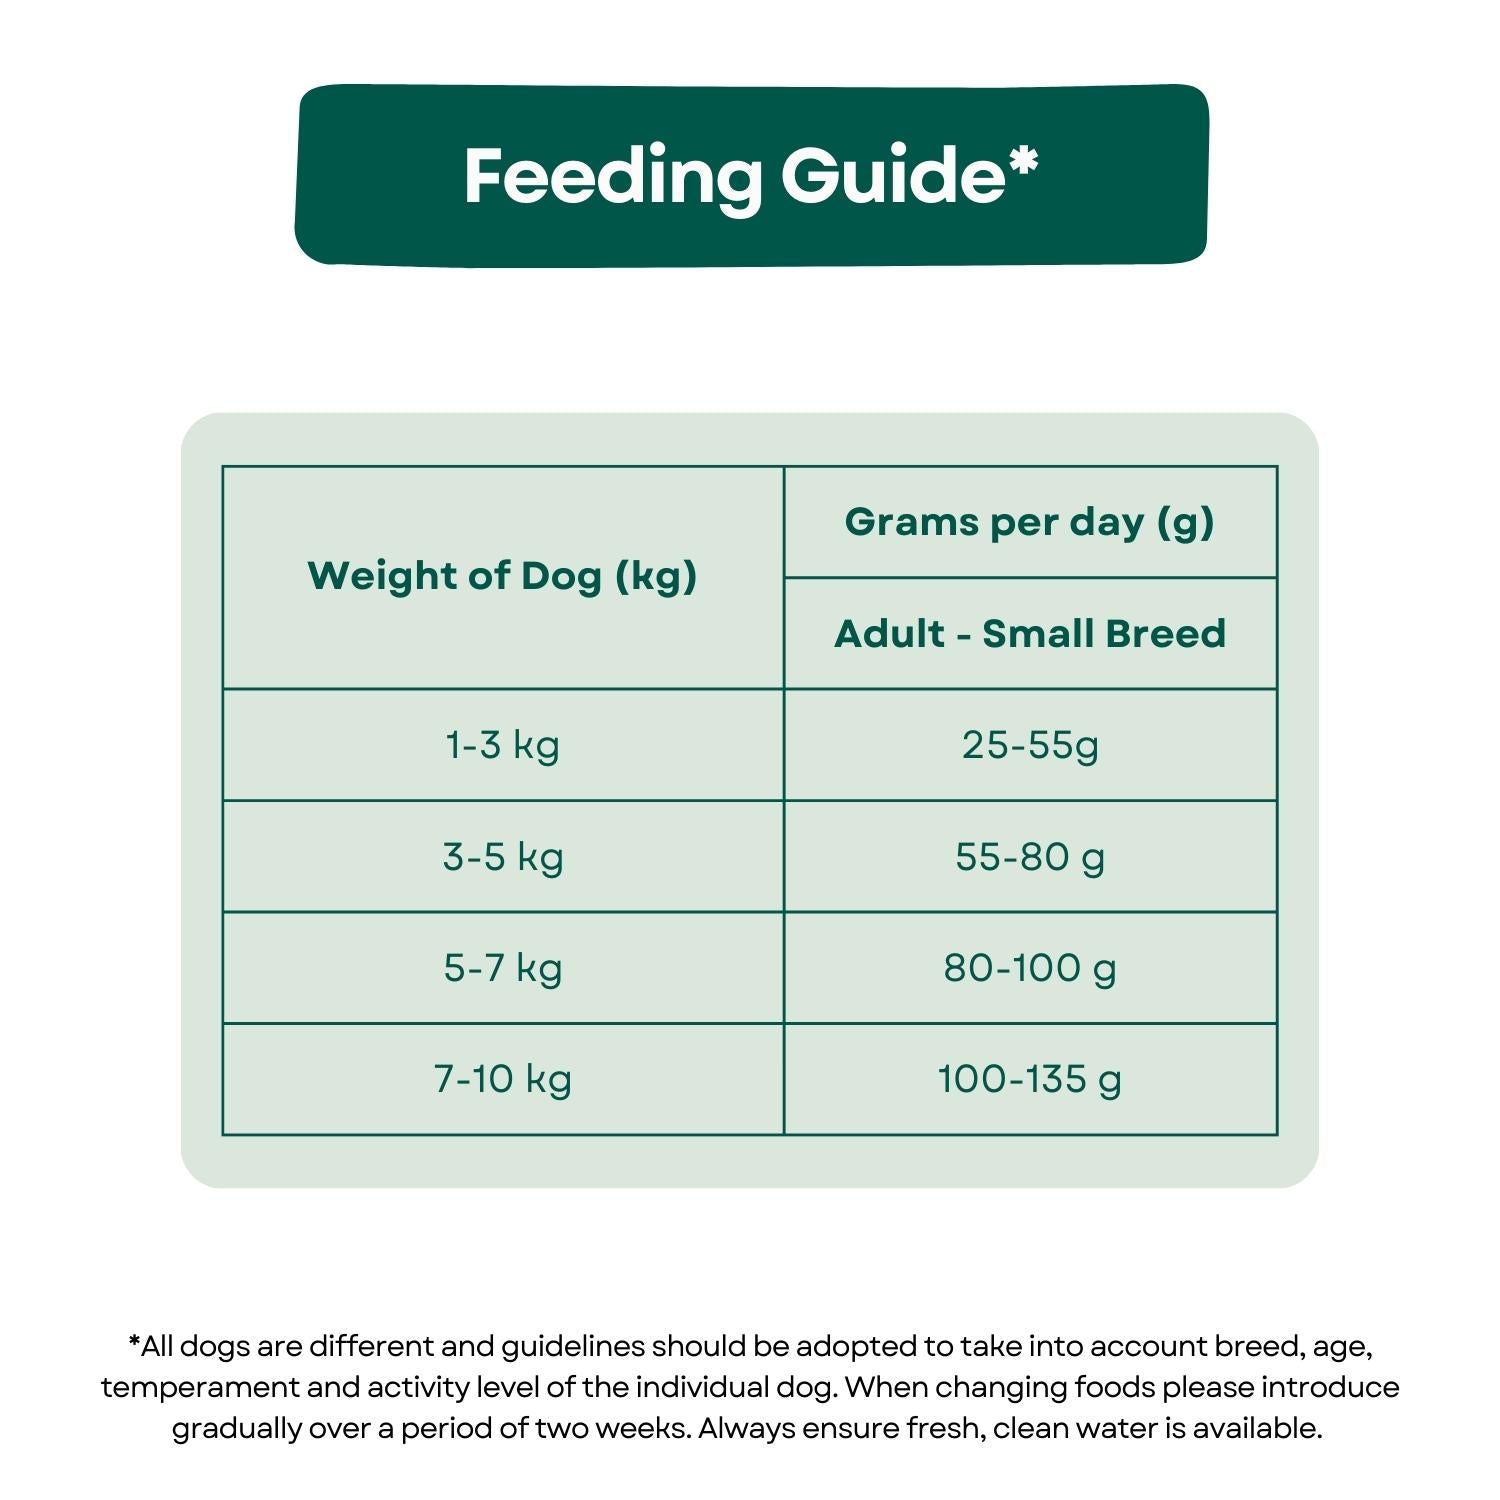 Feeding Guide Superfood 65 Small Breed Adult Dog Food - Angus Beef